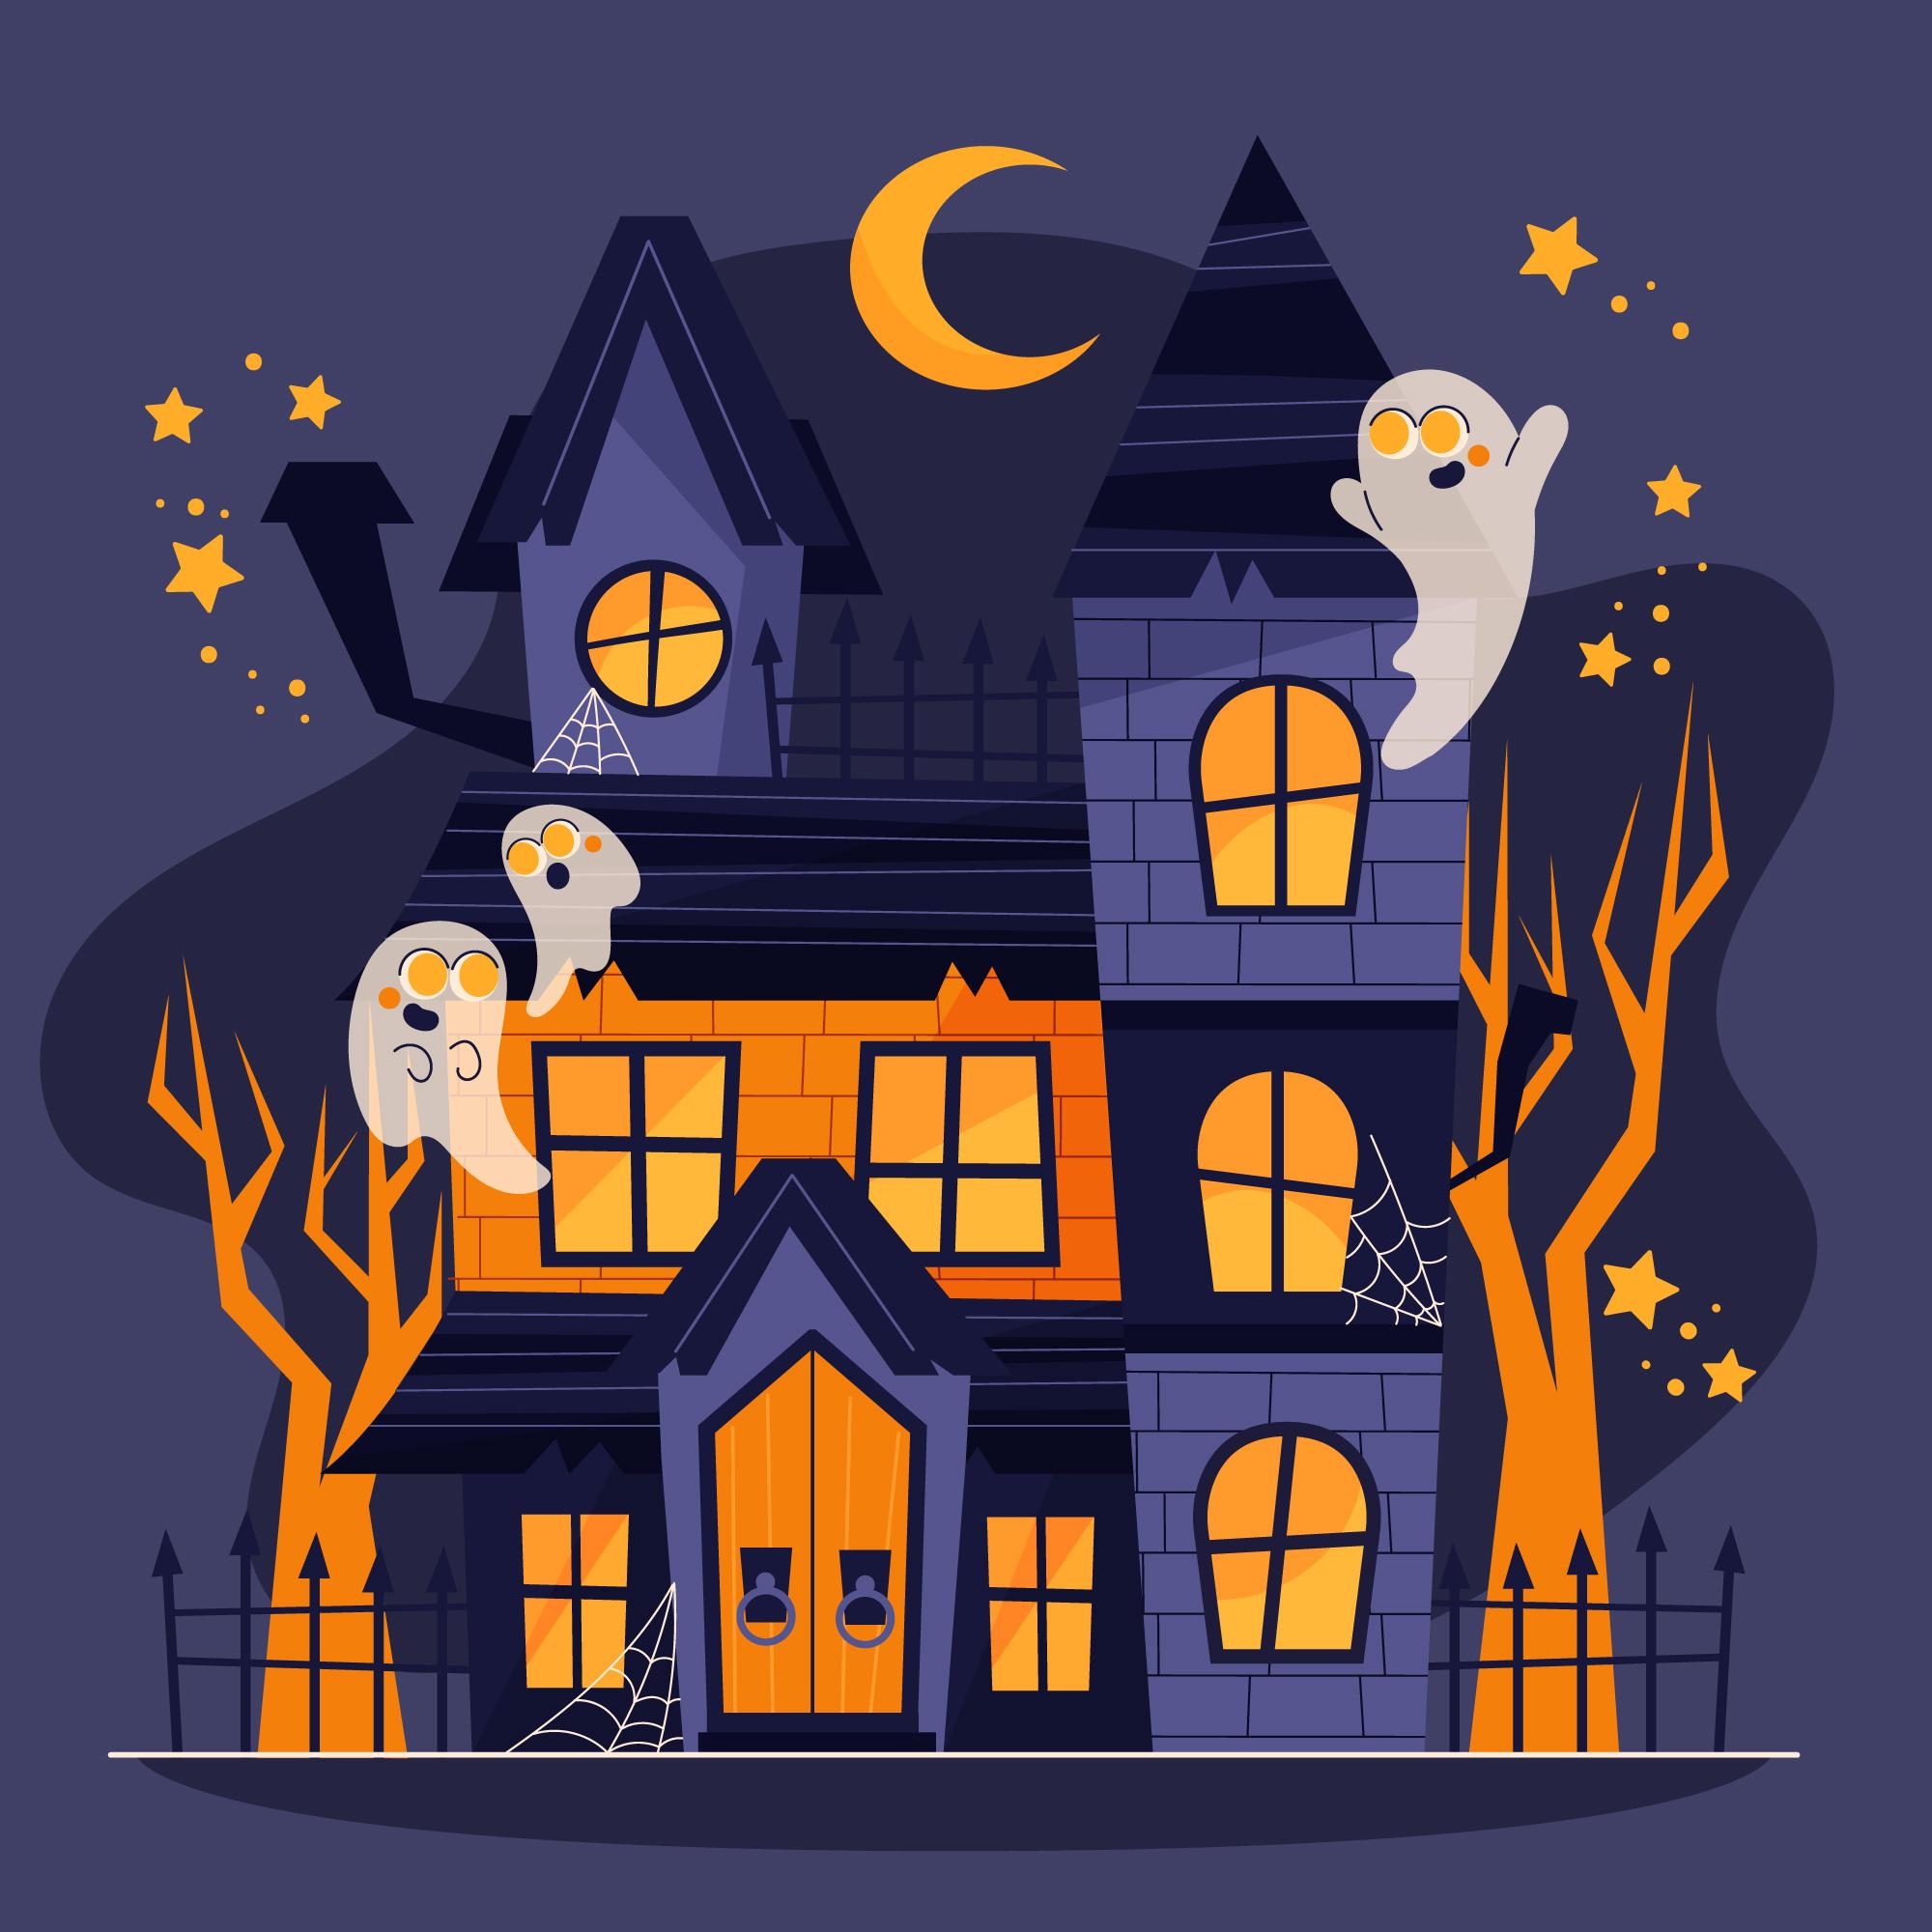 Illustration of a purple and orange 3 story house with ghosts and gnarled trees outside